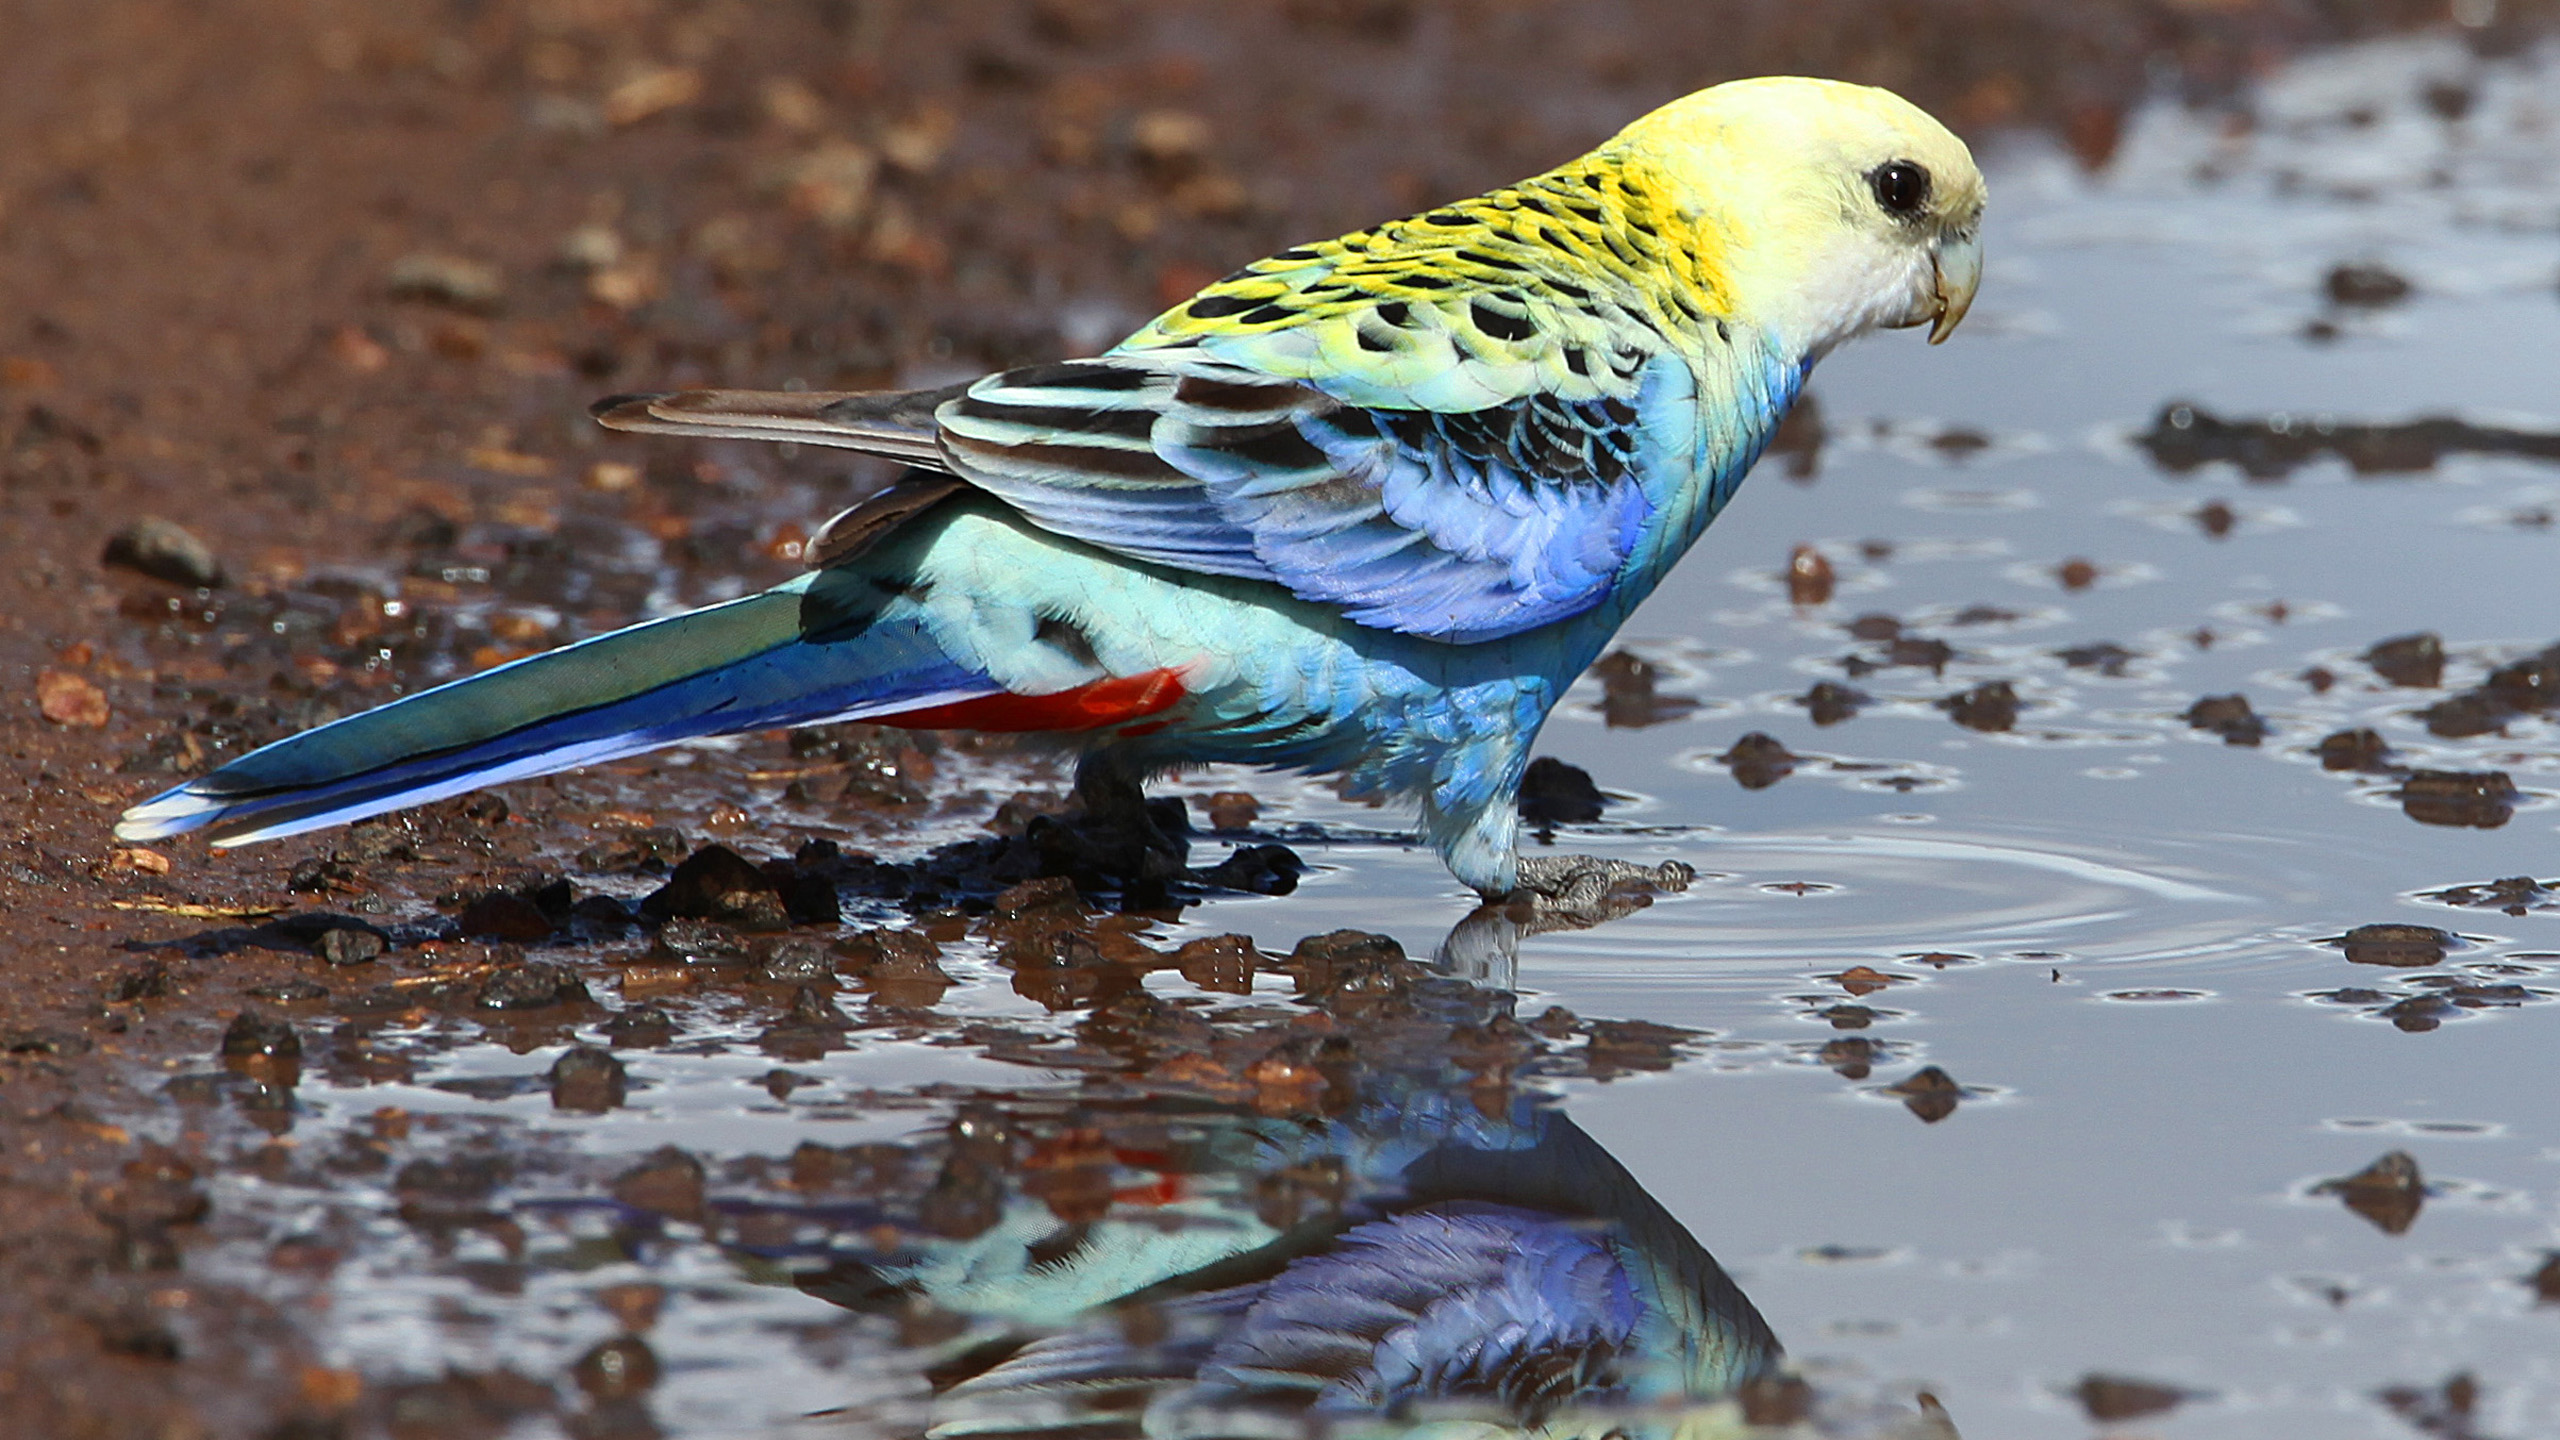 Yellow Blue Pale-Headed Rosella Bird Is Standing On Water With Reflection 2K Birds